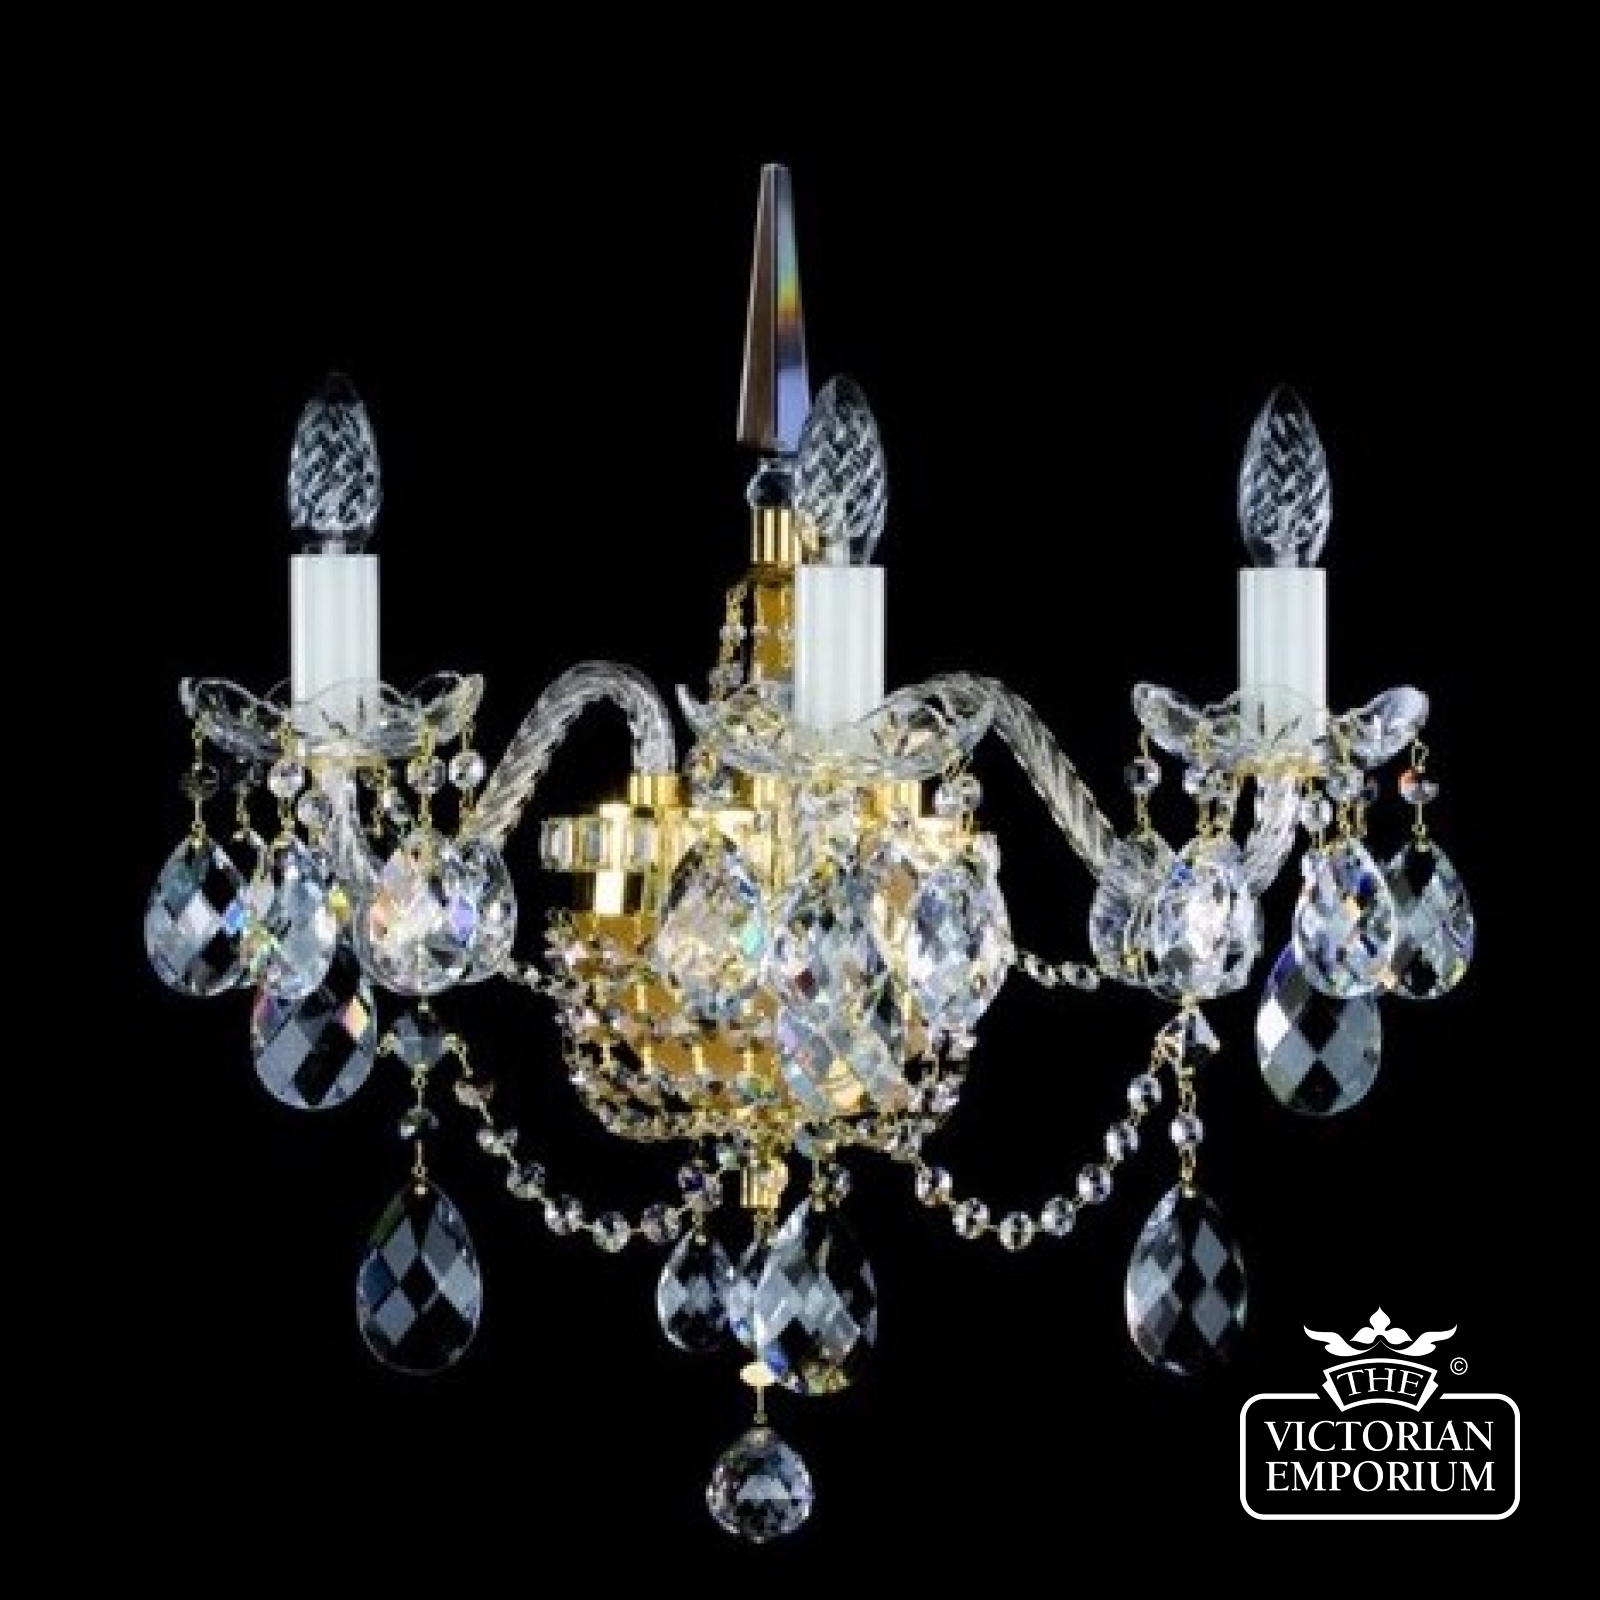 Sara Triple Wall Sconce - With Hand-cut Crystal Drops